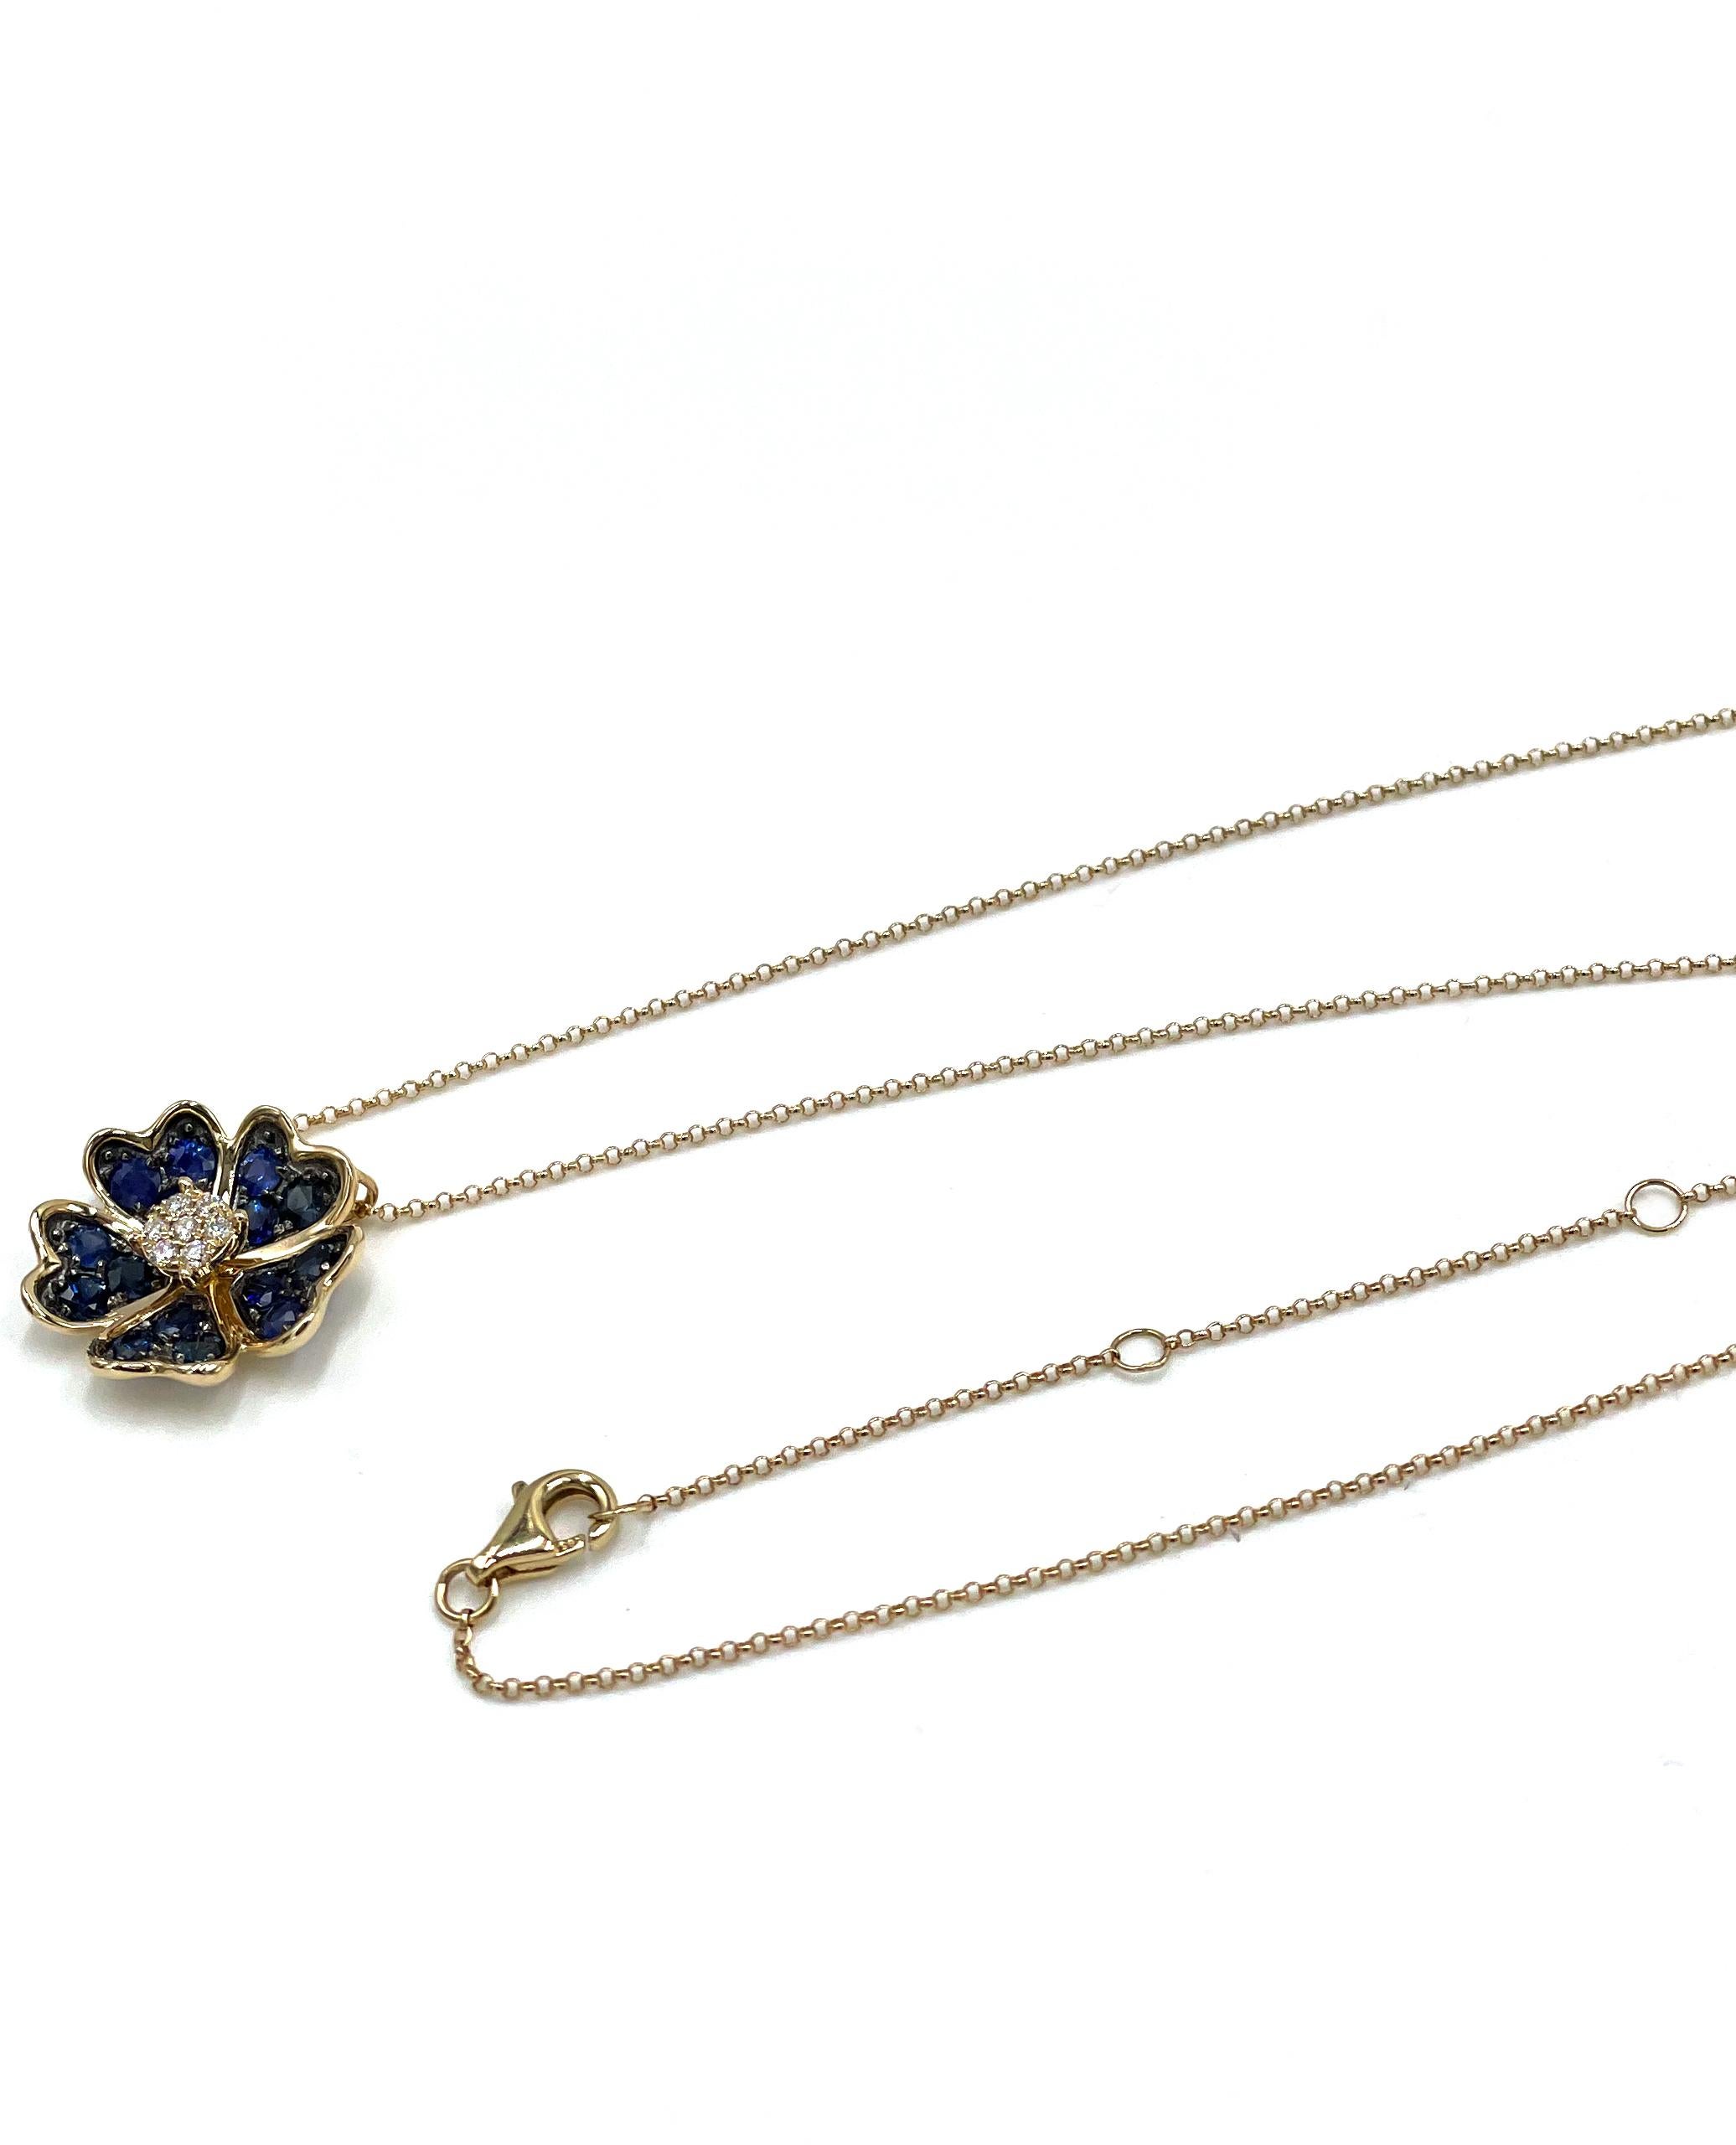 Contemporary 14k Yellow Gold Flower Pendant Necklace with Sapphires and Diamonds For Sale